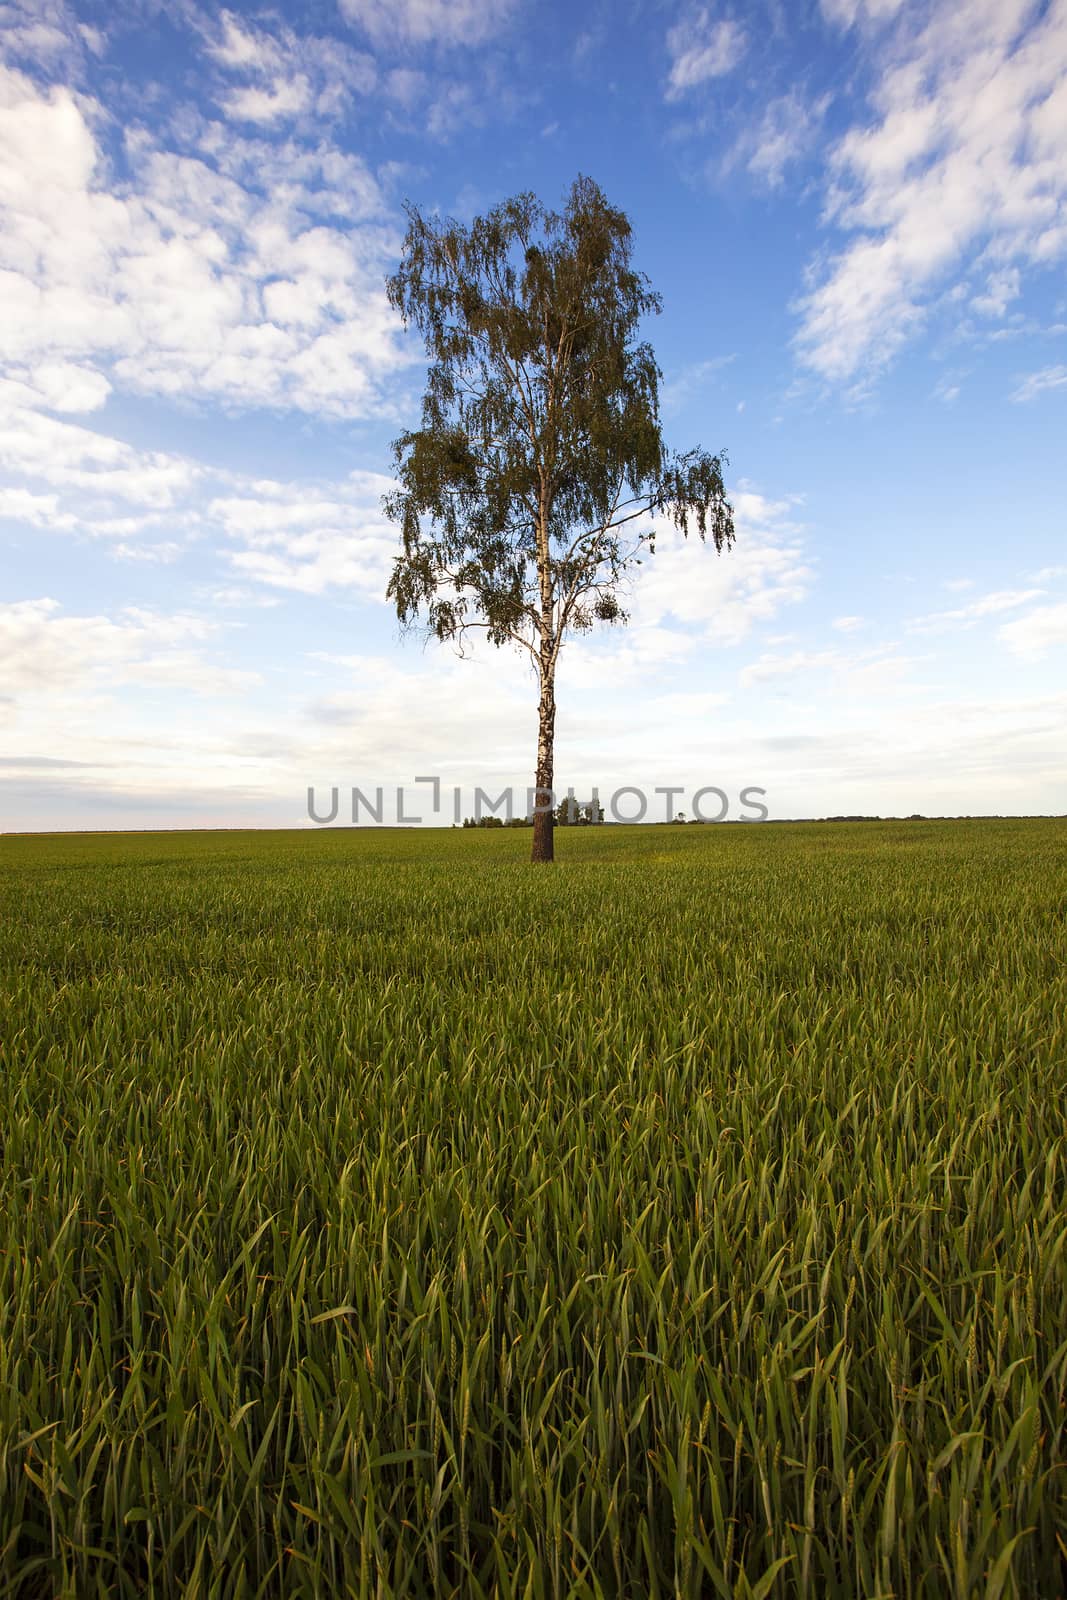   the tree of a birch growing in a field on which grow up plants